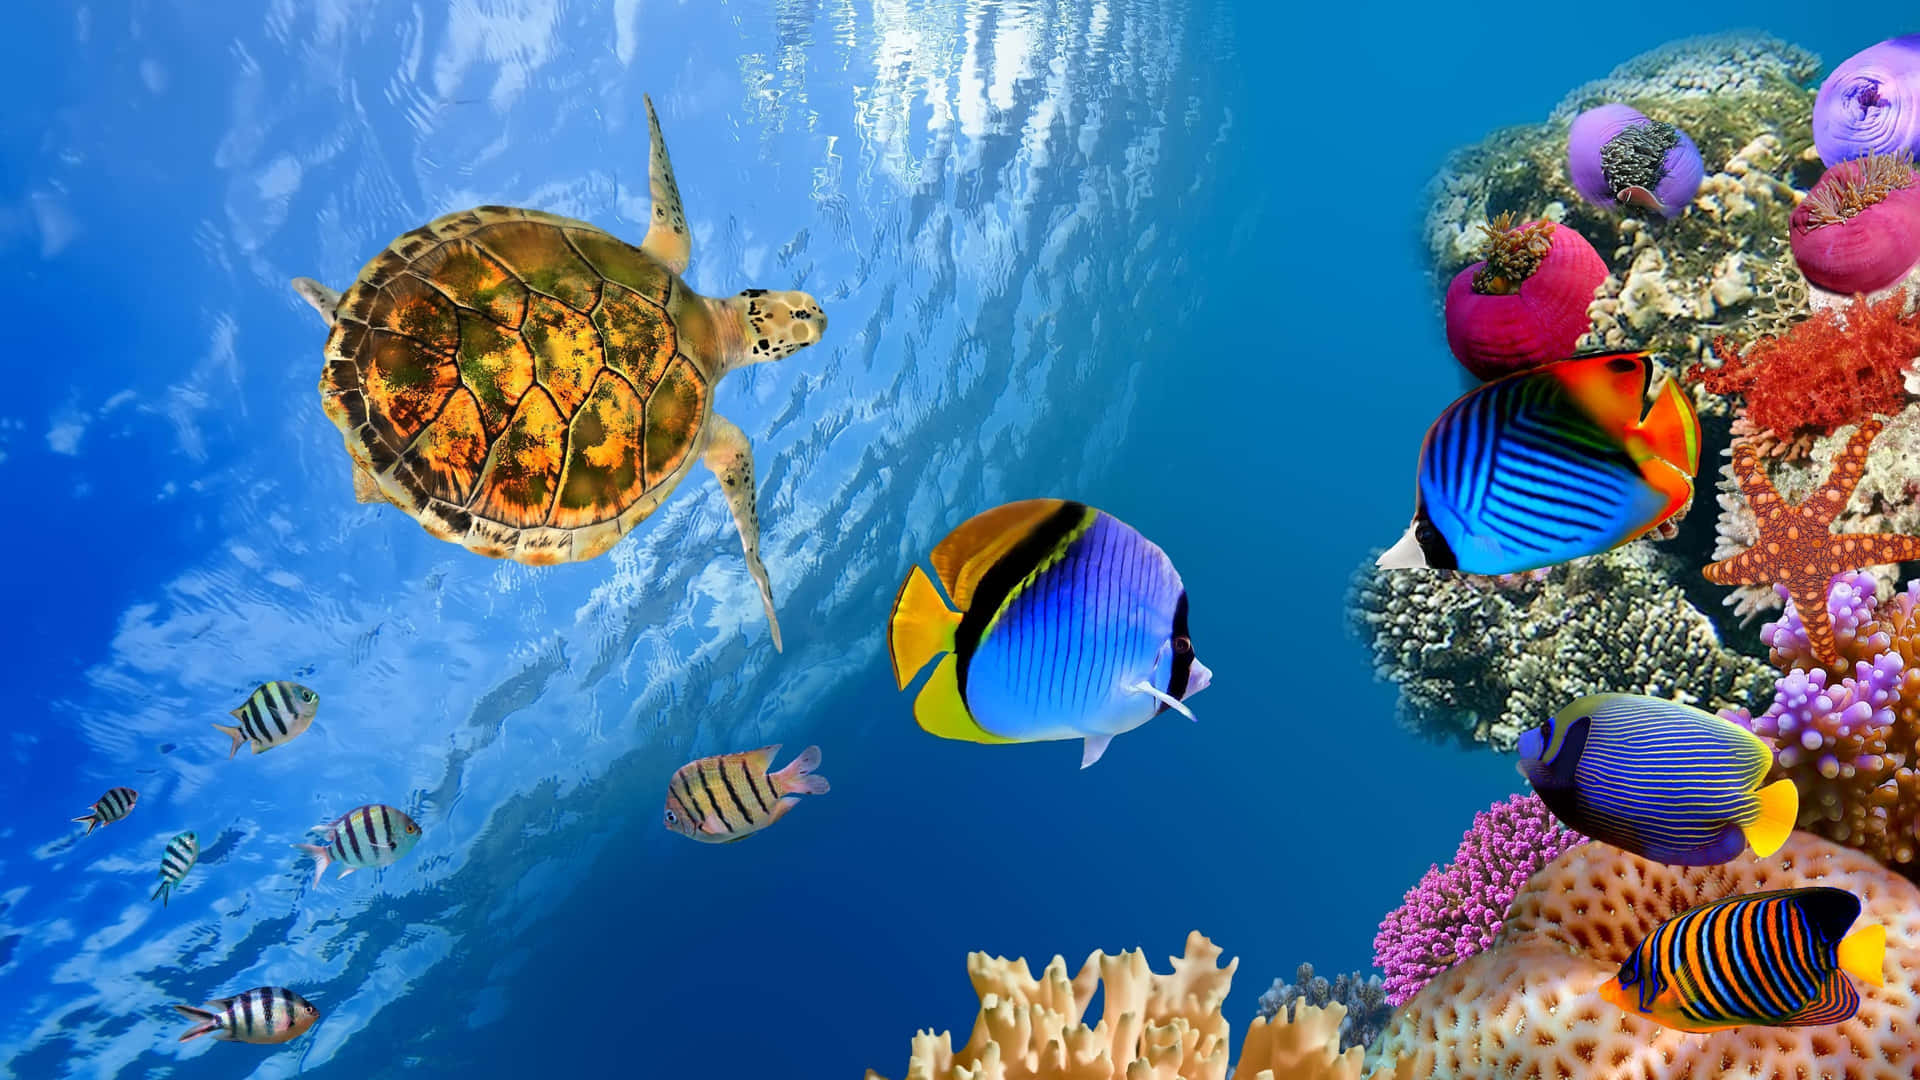 Colorful school of fish swimming through coral reef Wallpaper